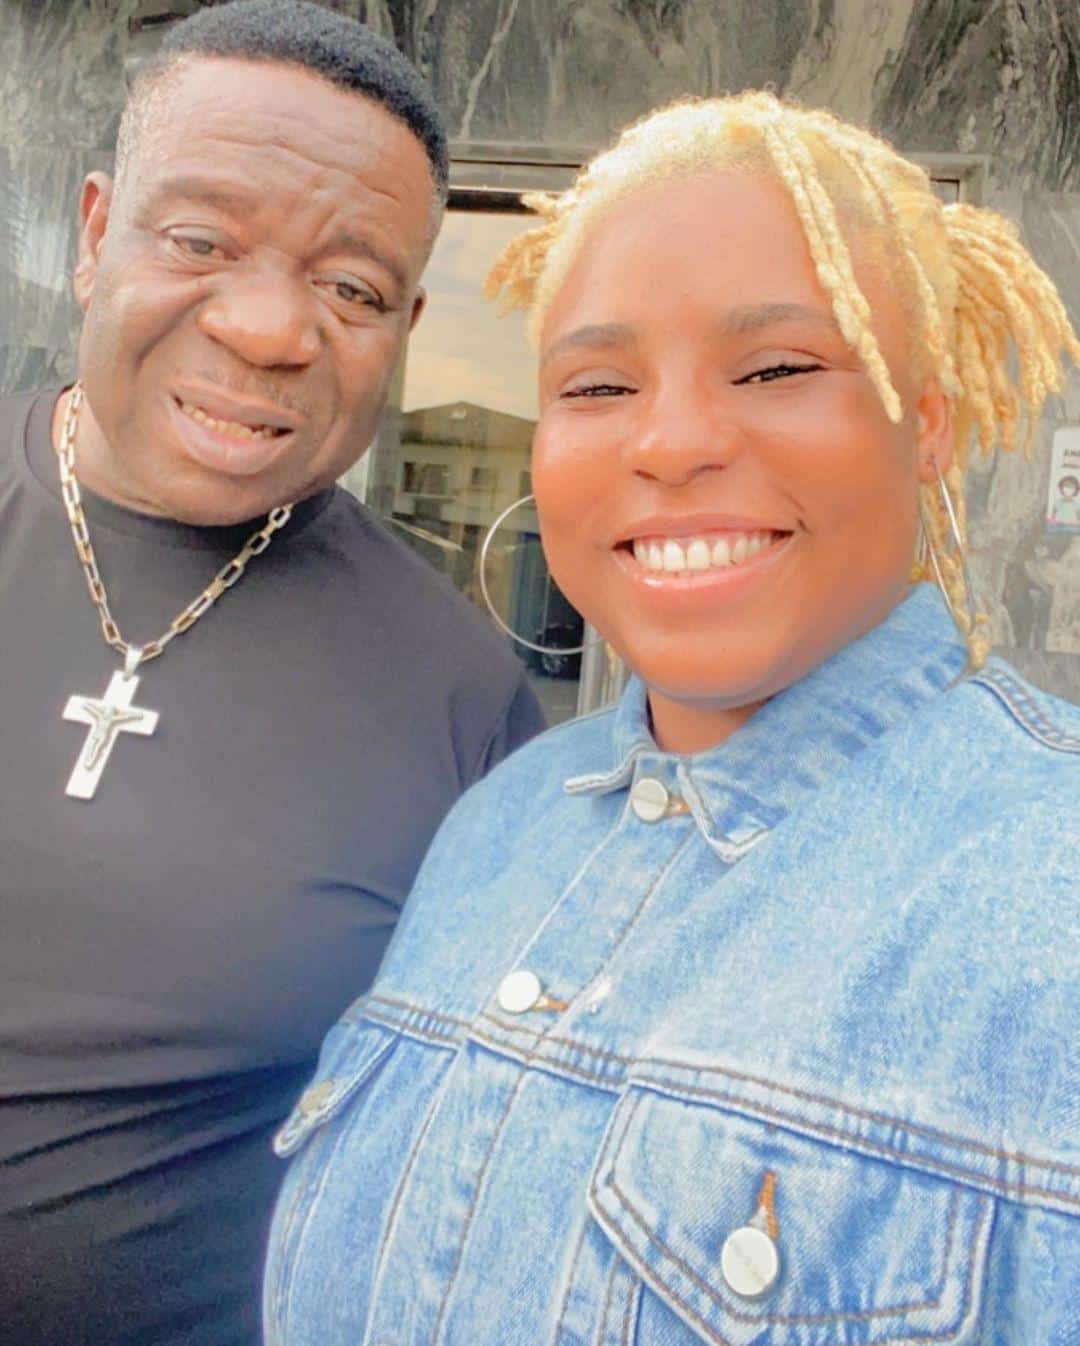 Mr Ibu called out by wife over domestic abuse, accused of affair with daughter Jasmine (Video)